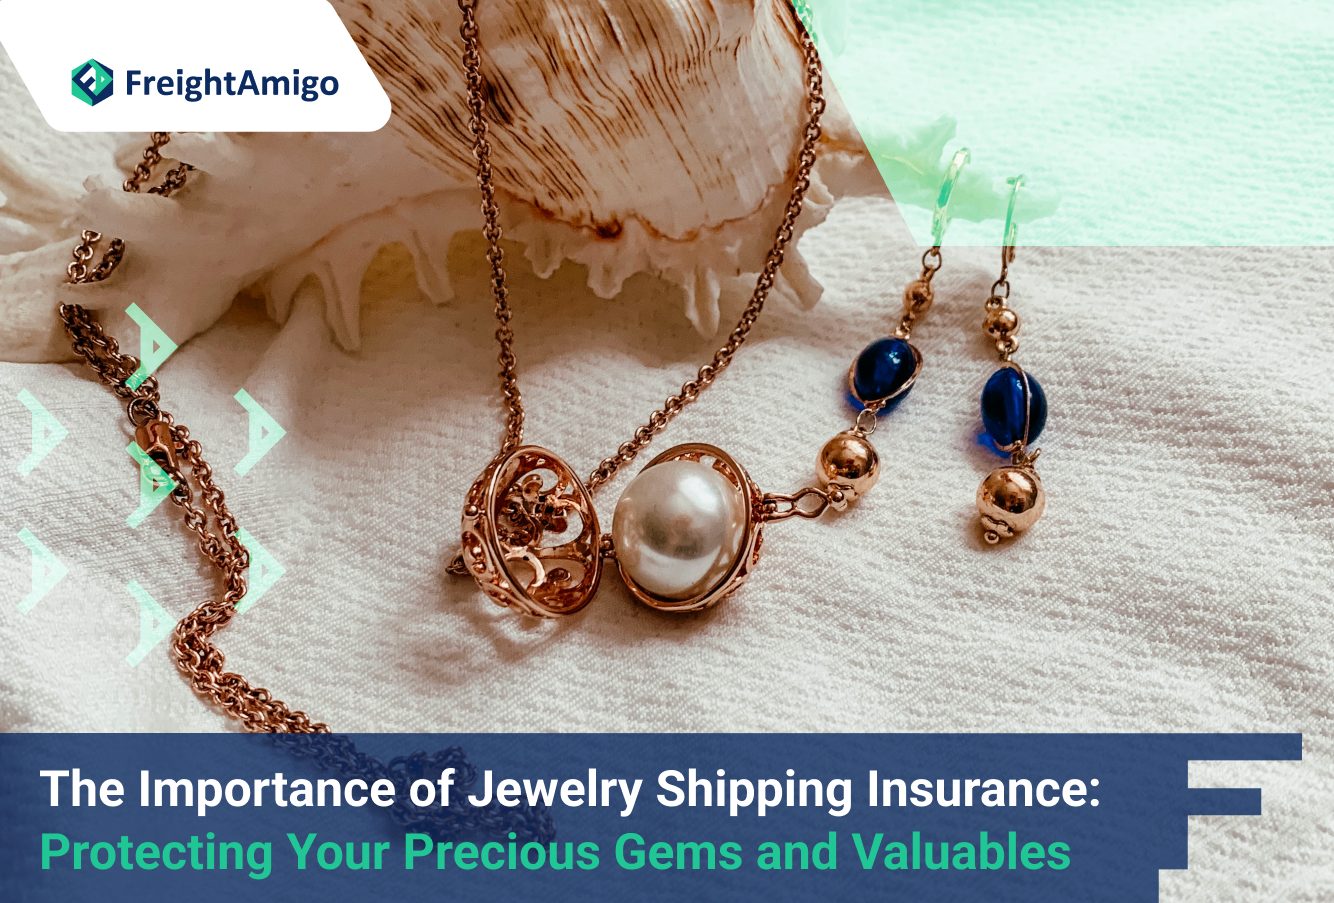 The Importance of Jewelry Shipping Insurance: Protecting Your Precious Gems and Valuables